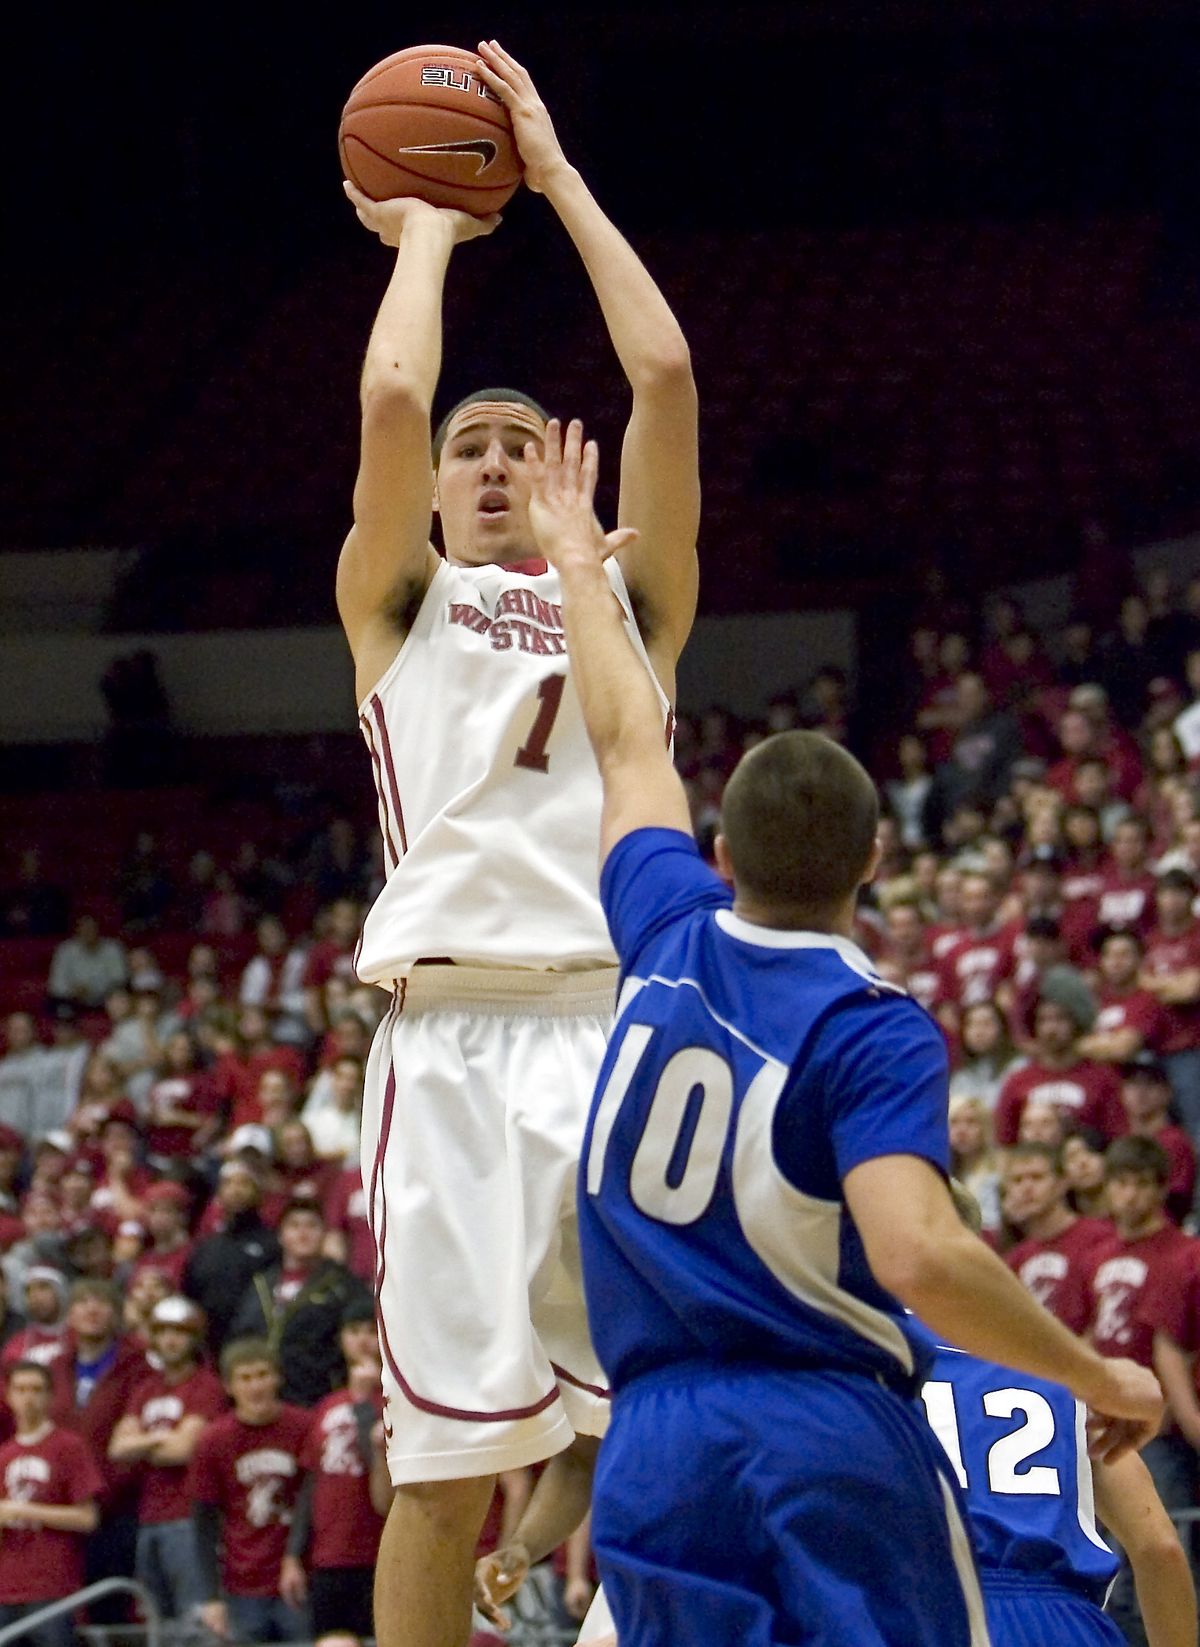 Washington State guard Klay Thompson (1) hits a 3-point shot over the defense of IPFW guard Zach Plackemeier (10) during the first half of an NCAA college basketball game Thursday, Nov. 19, 2009, at Beasley Coliseum in Pullman, Wash. (Dean Hare / Associated Press)